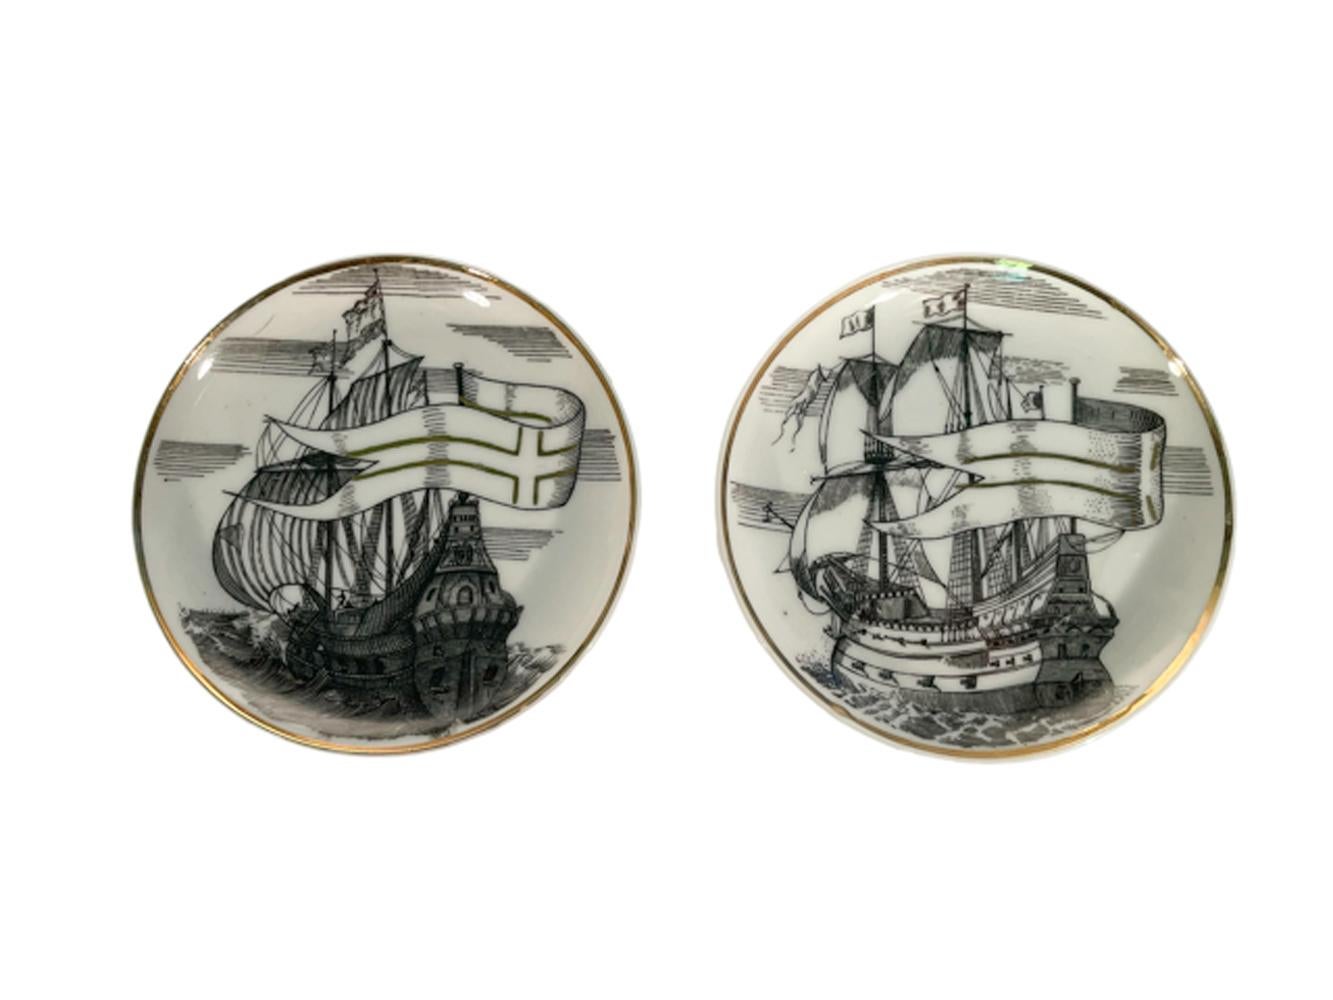 Mid-Century Modern Mid-20th Century Porcelain Drink Coasters, Sailing Ships in Black W/Gold Accents For Sale